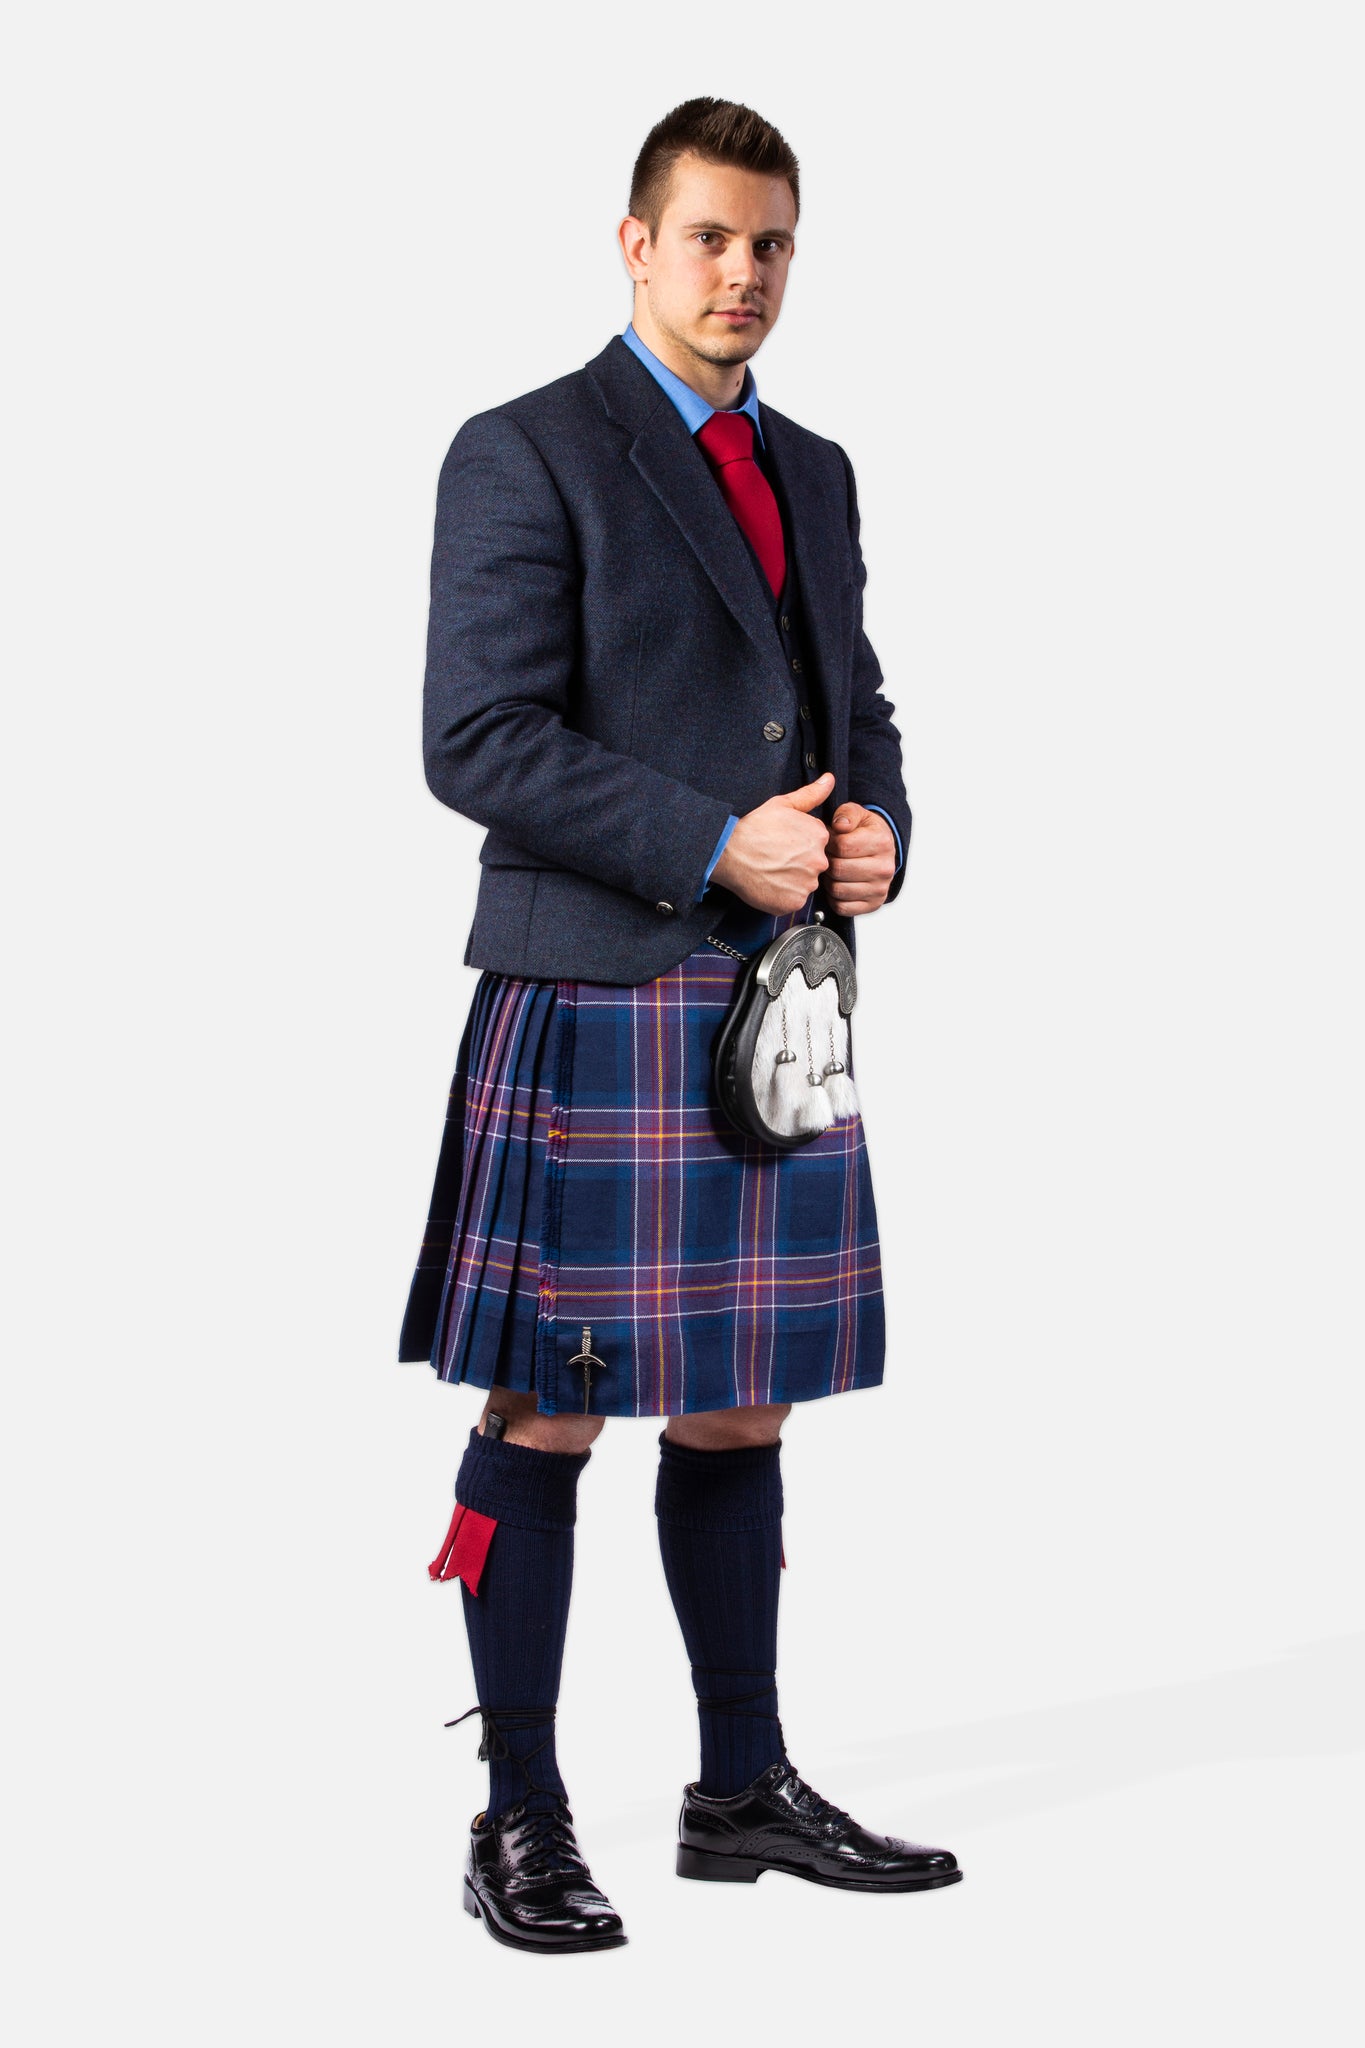 Scotland National Team / Lovat Navy Tweed Hire Outfit